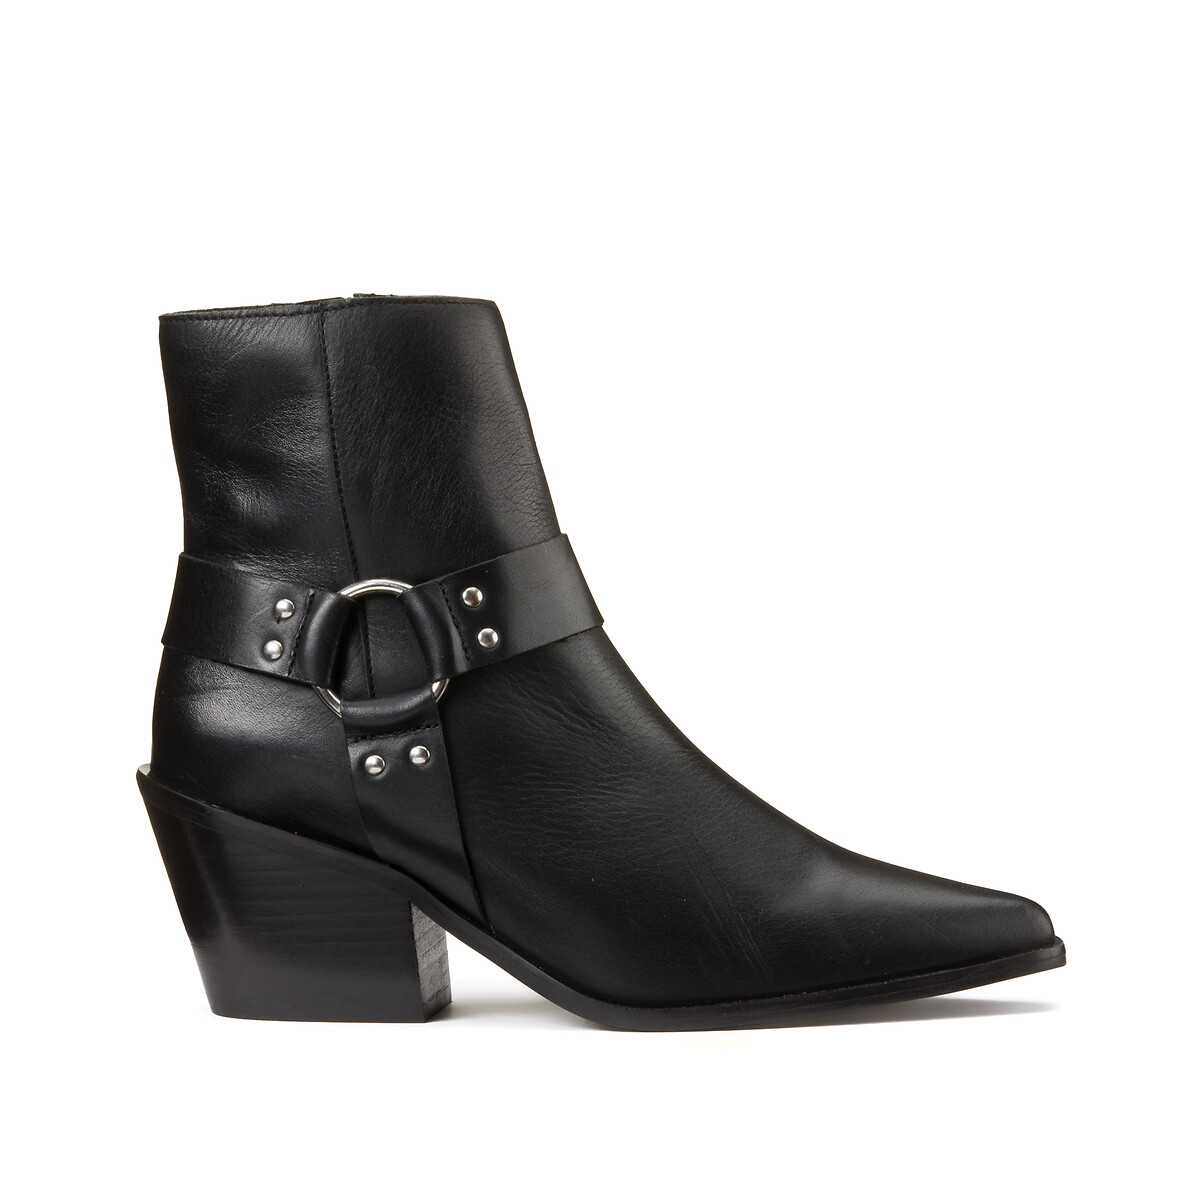 Leather Western Ankle Boots with Block Heel